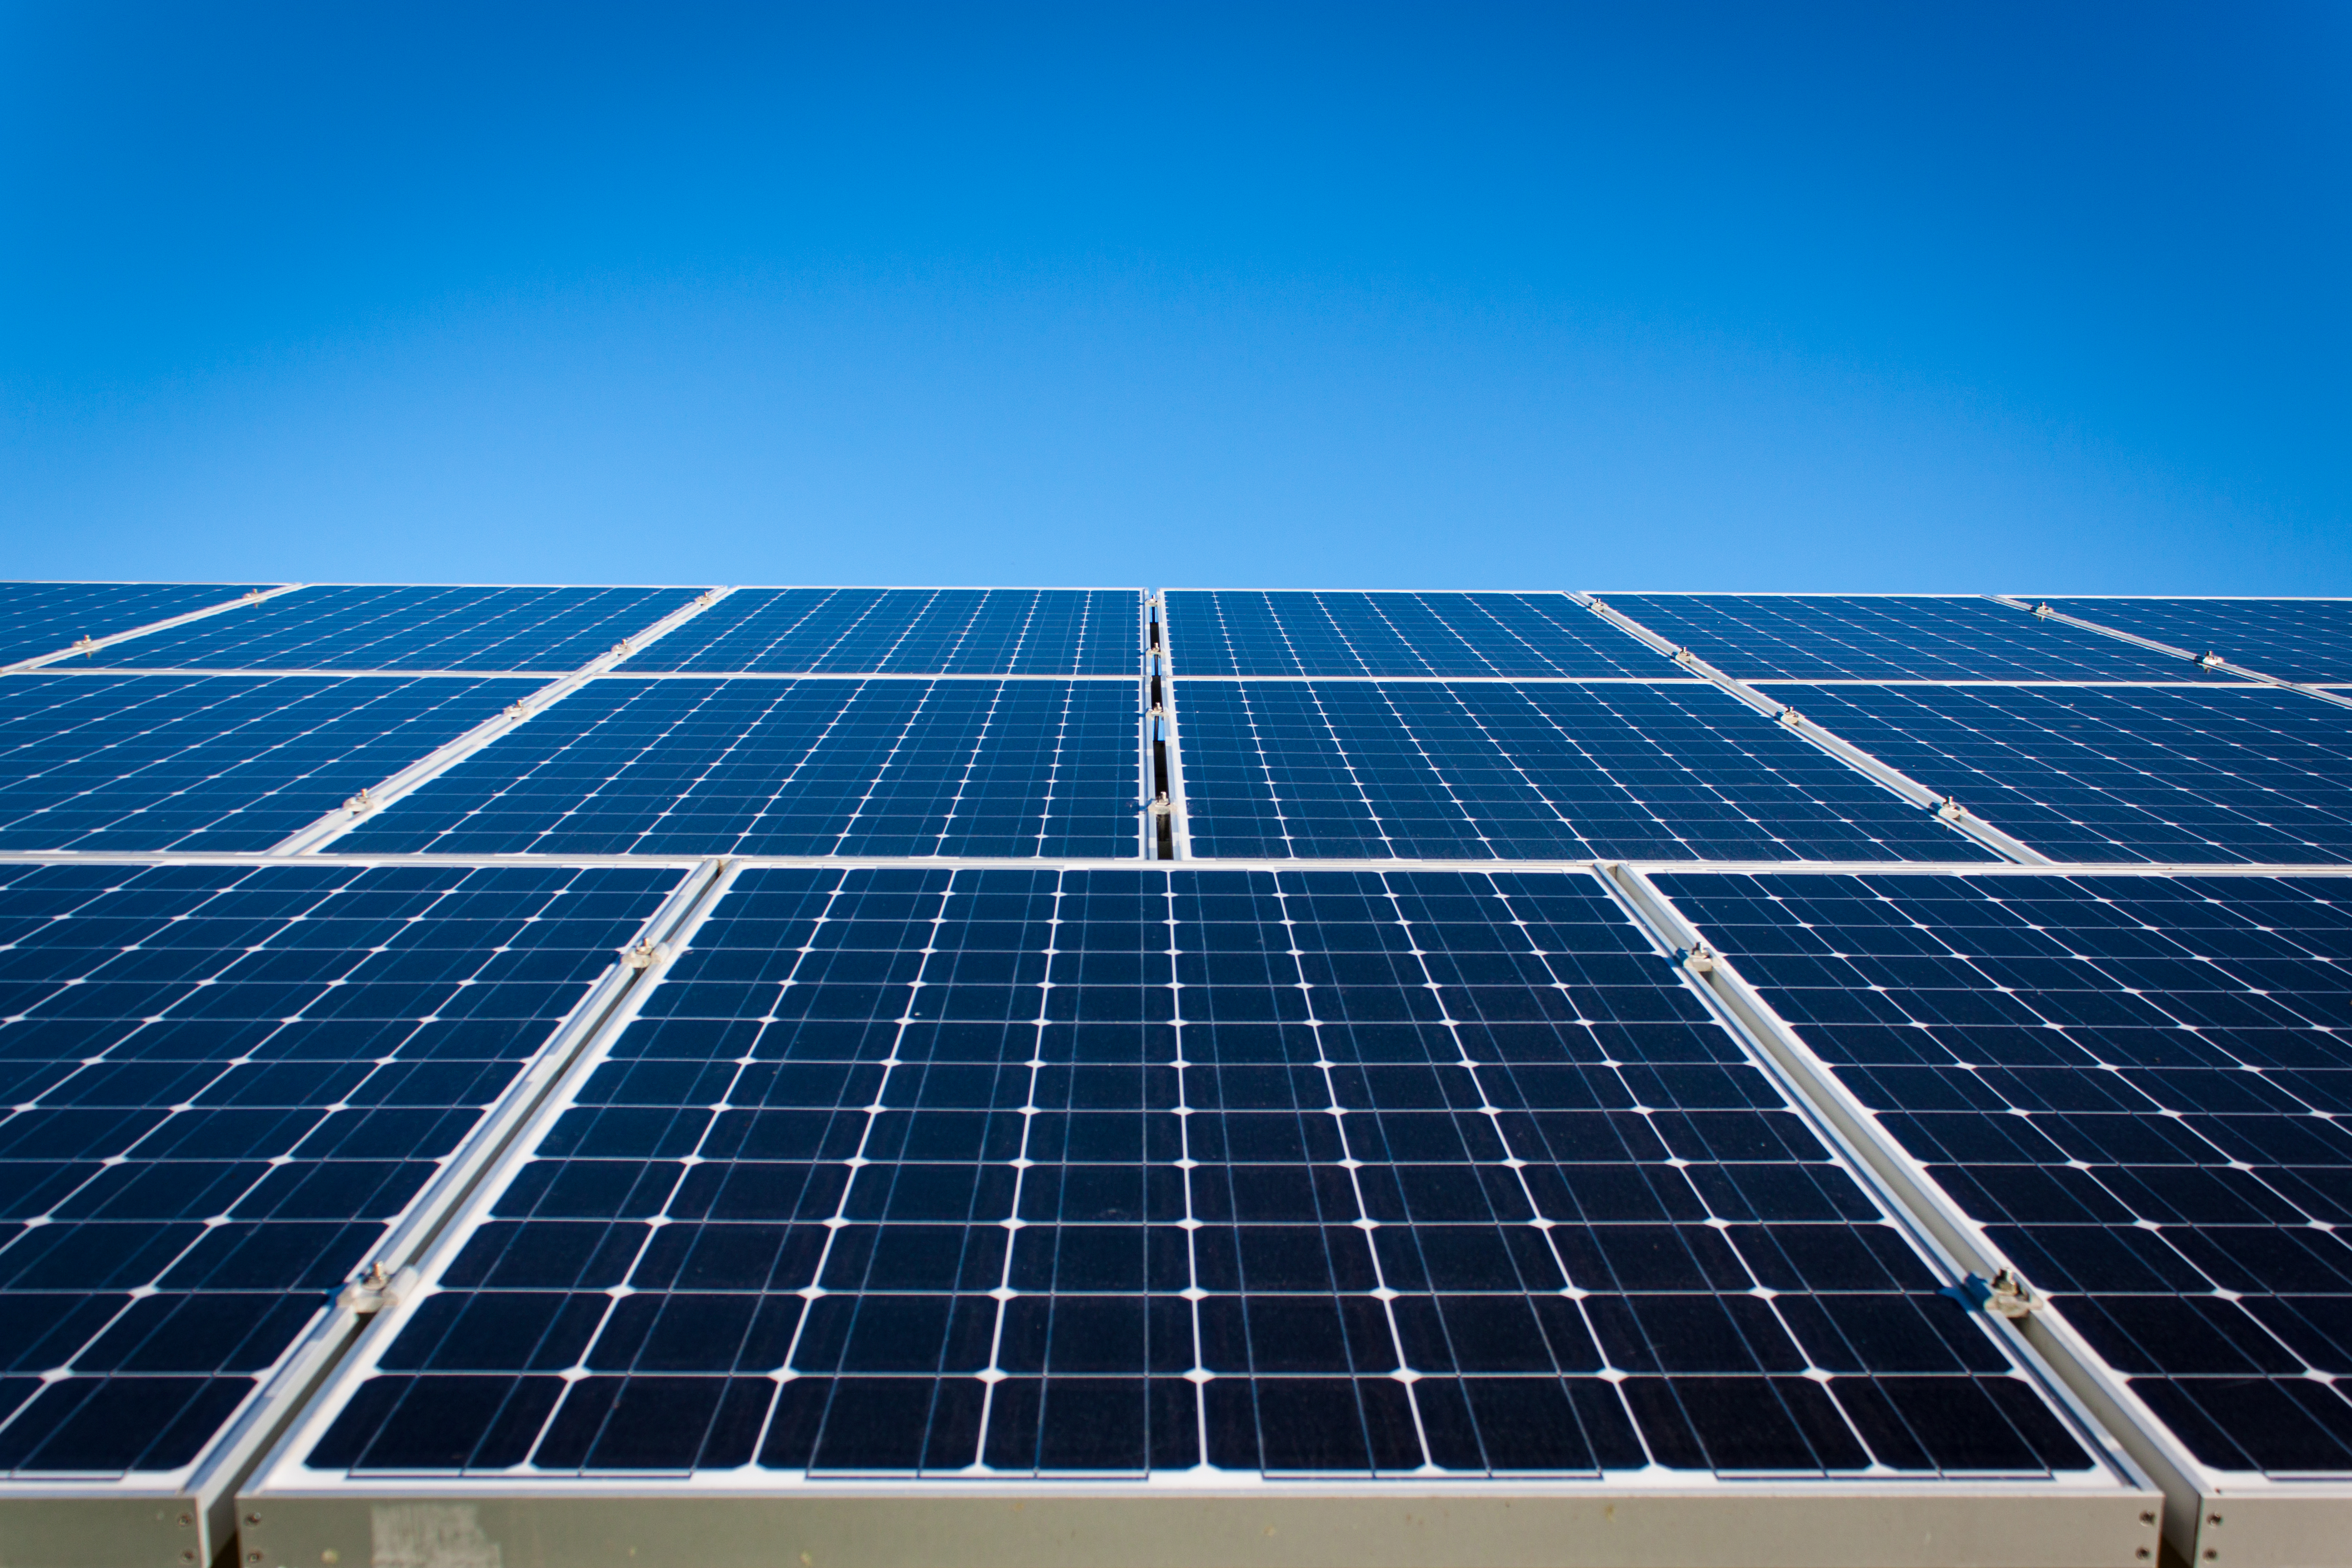 SA Water to Install 6MW of Solar PV in Quest to Cut Power Costs – to Zero